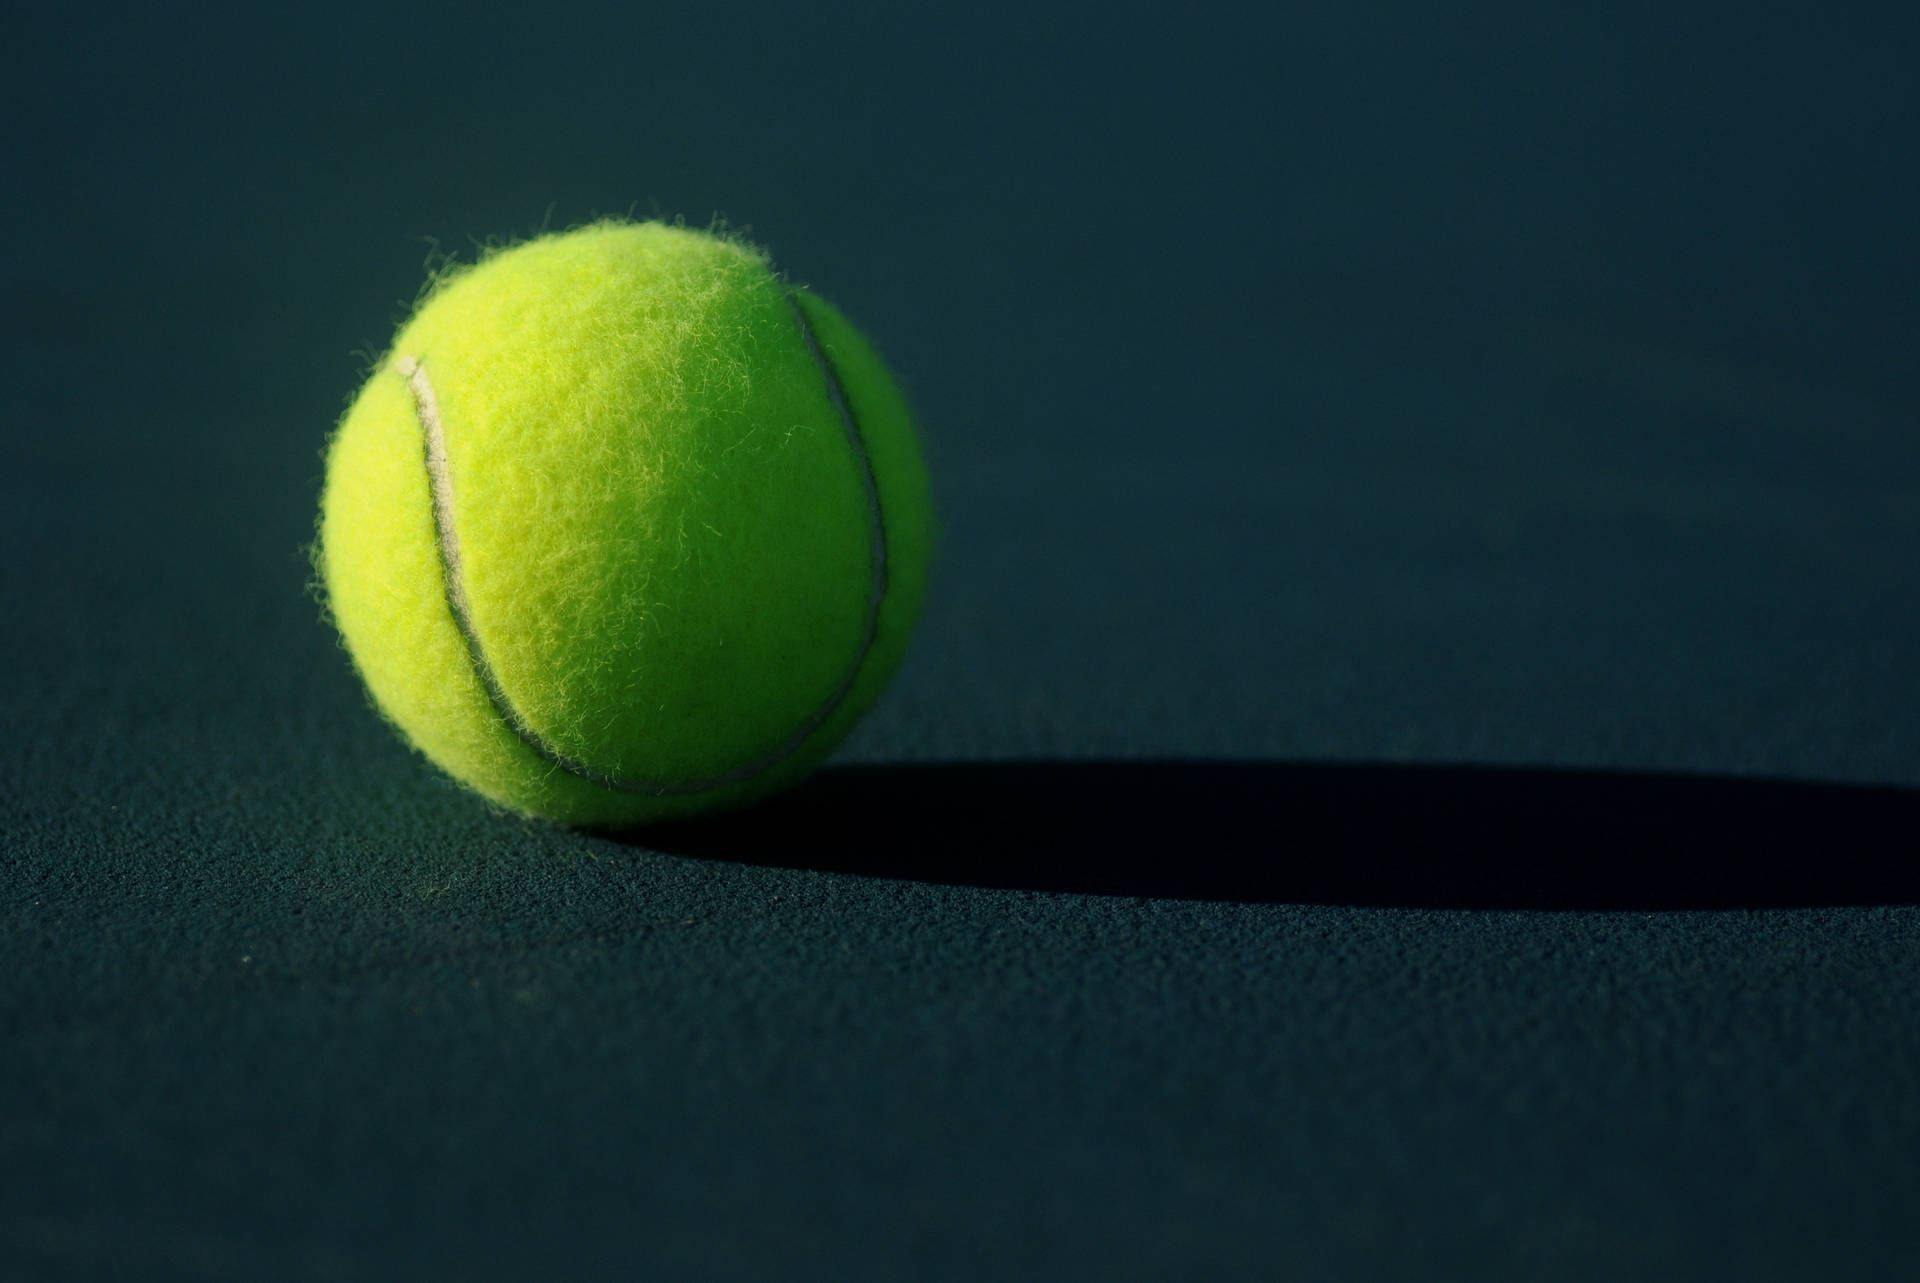 Tennis 3668X2452 Wallpaper and Background Image